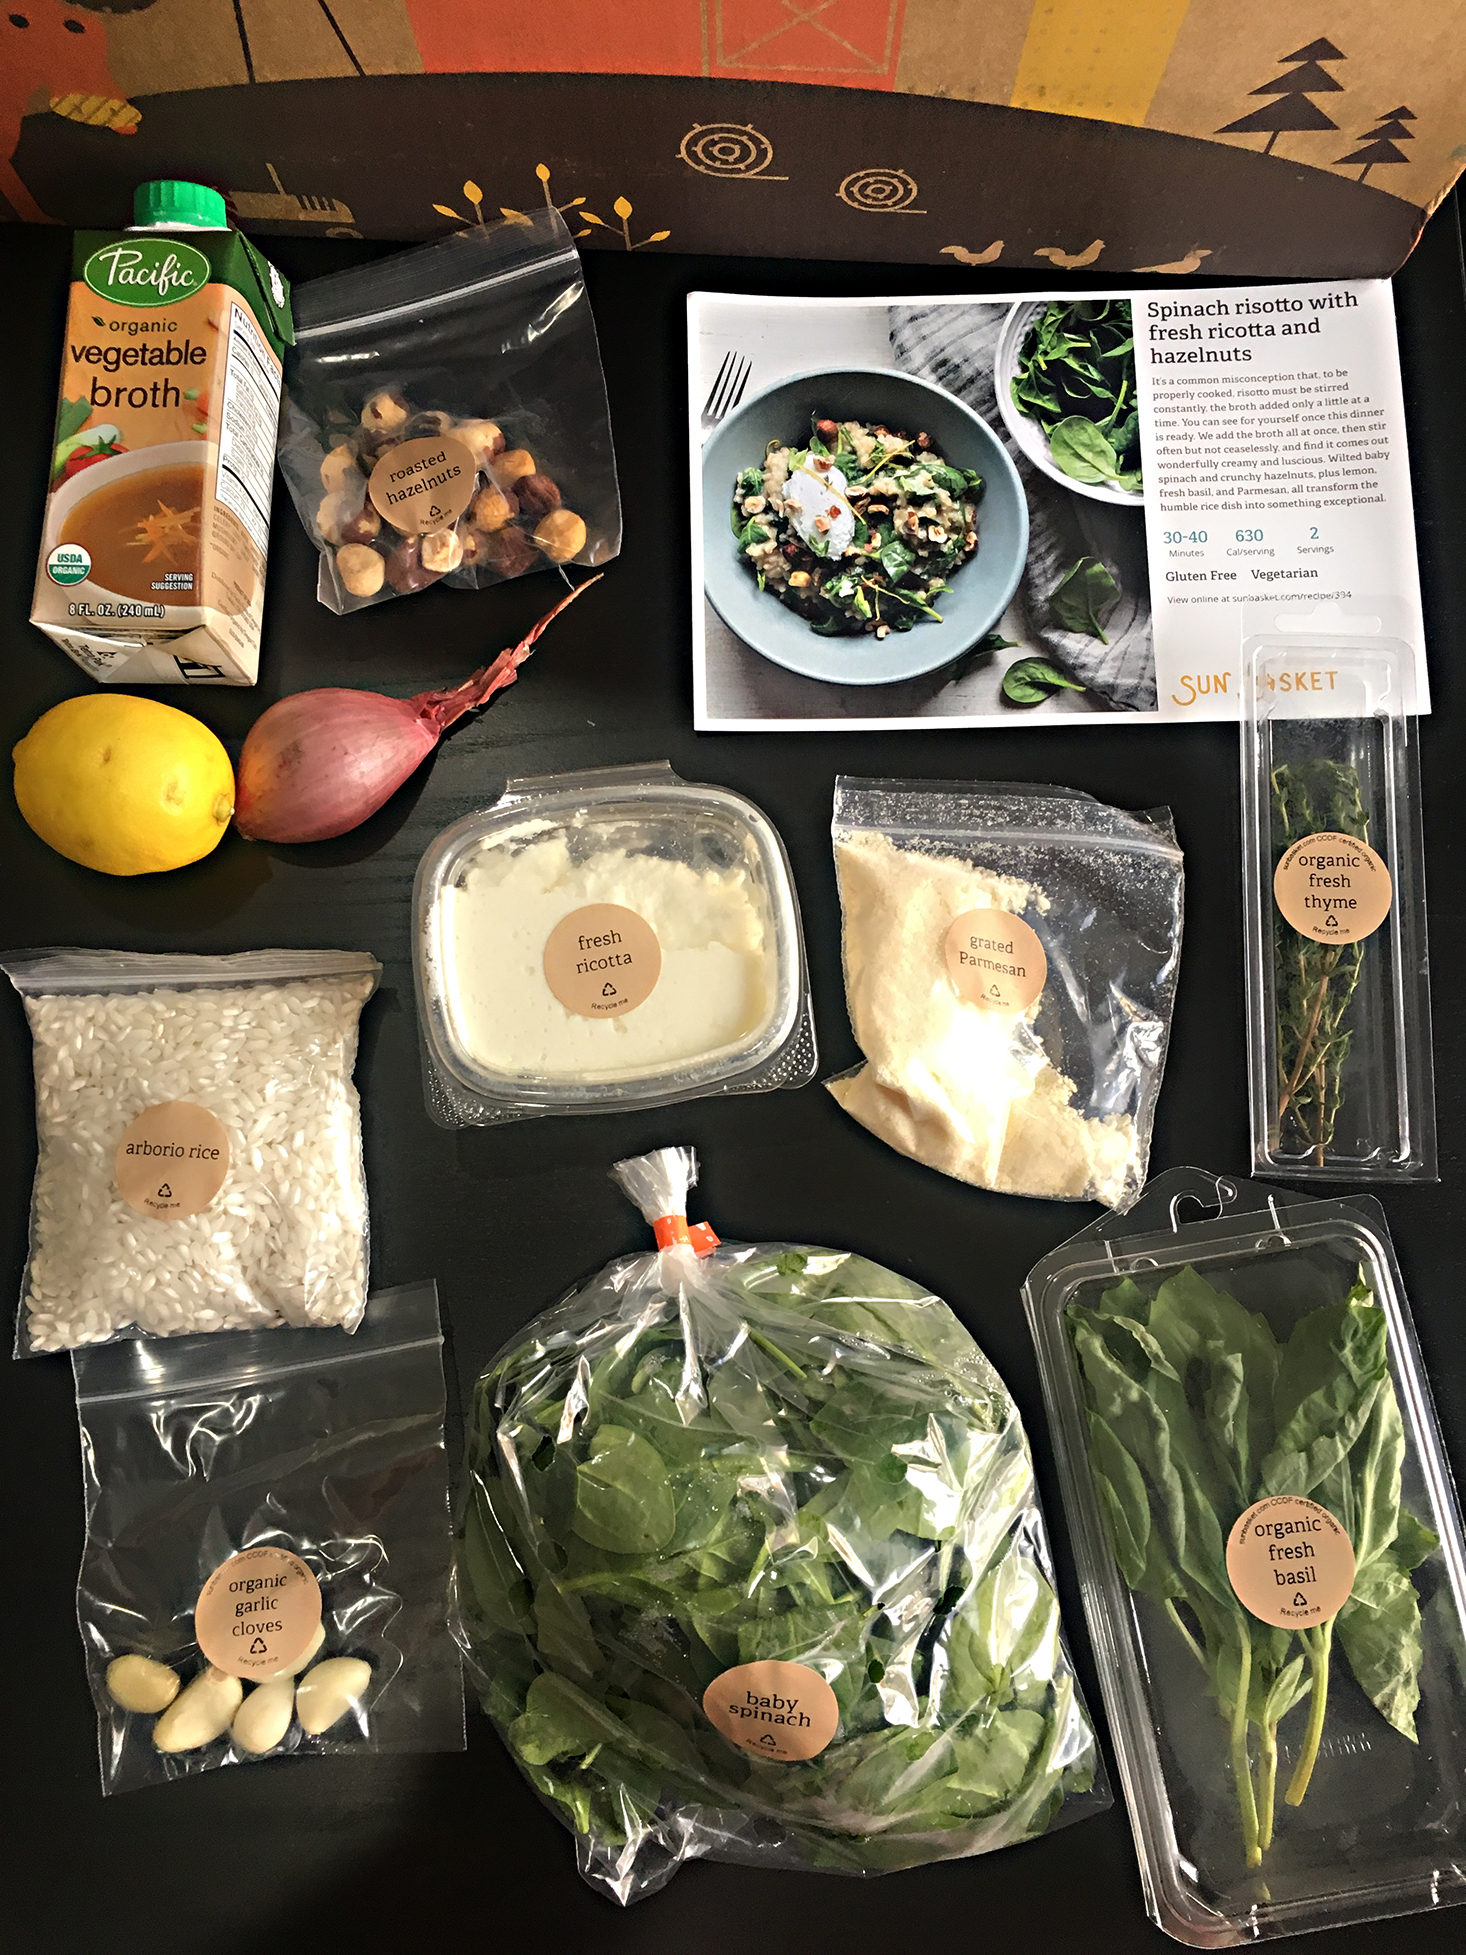 Sunbasket-February-2017-Risotto-Ingredients